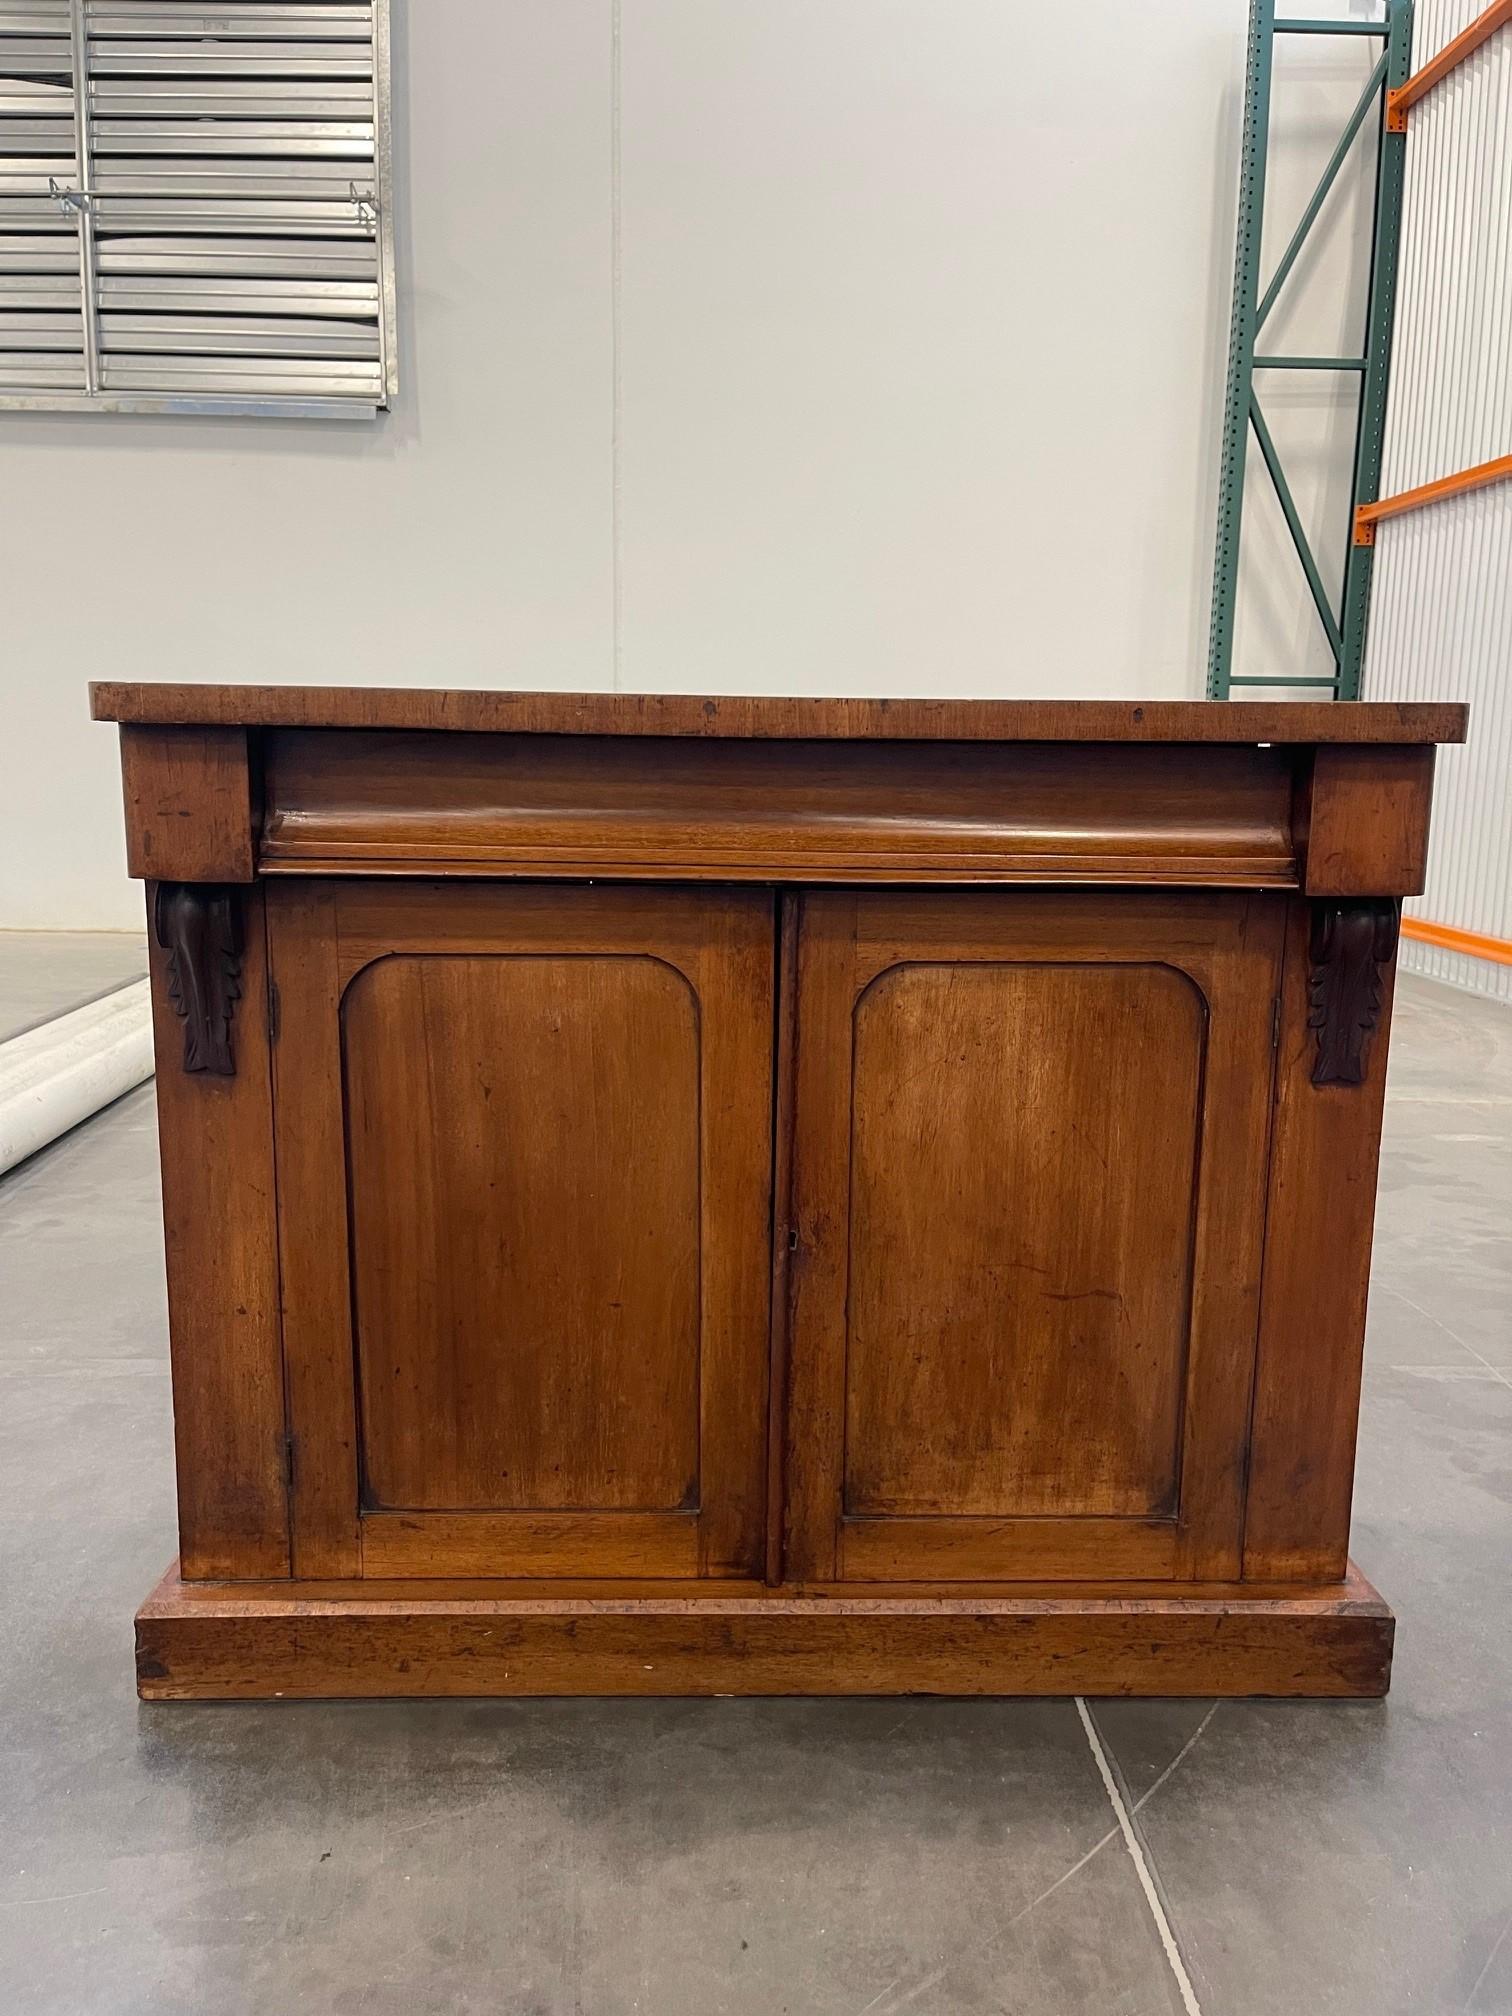 An antique Victorian 19th century mahogany chiffonier base sideboard / server. Of rectangular form with single shaped drawer twin cupboard doors and shaped molding, the interior opens up to one shelf. The chiffonier is raised on a plinth base.